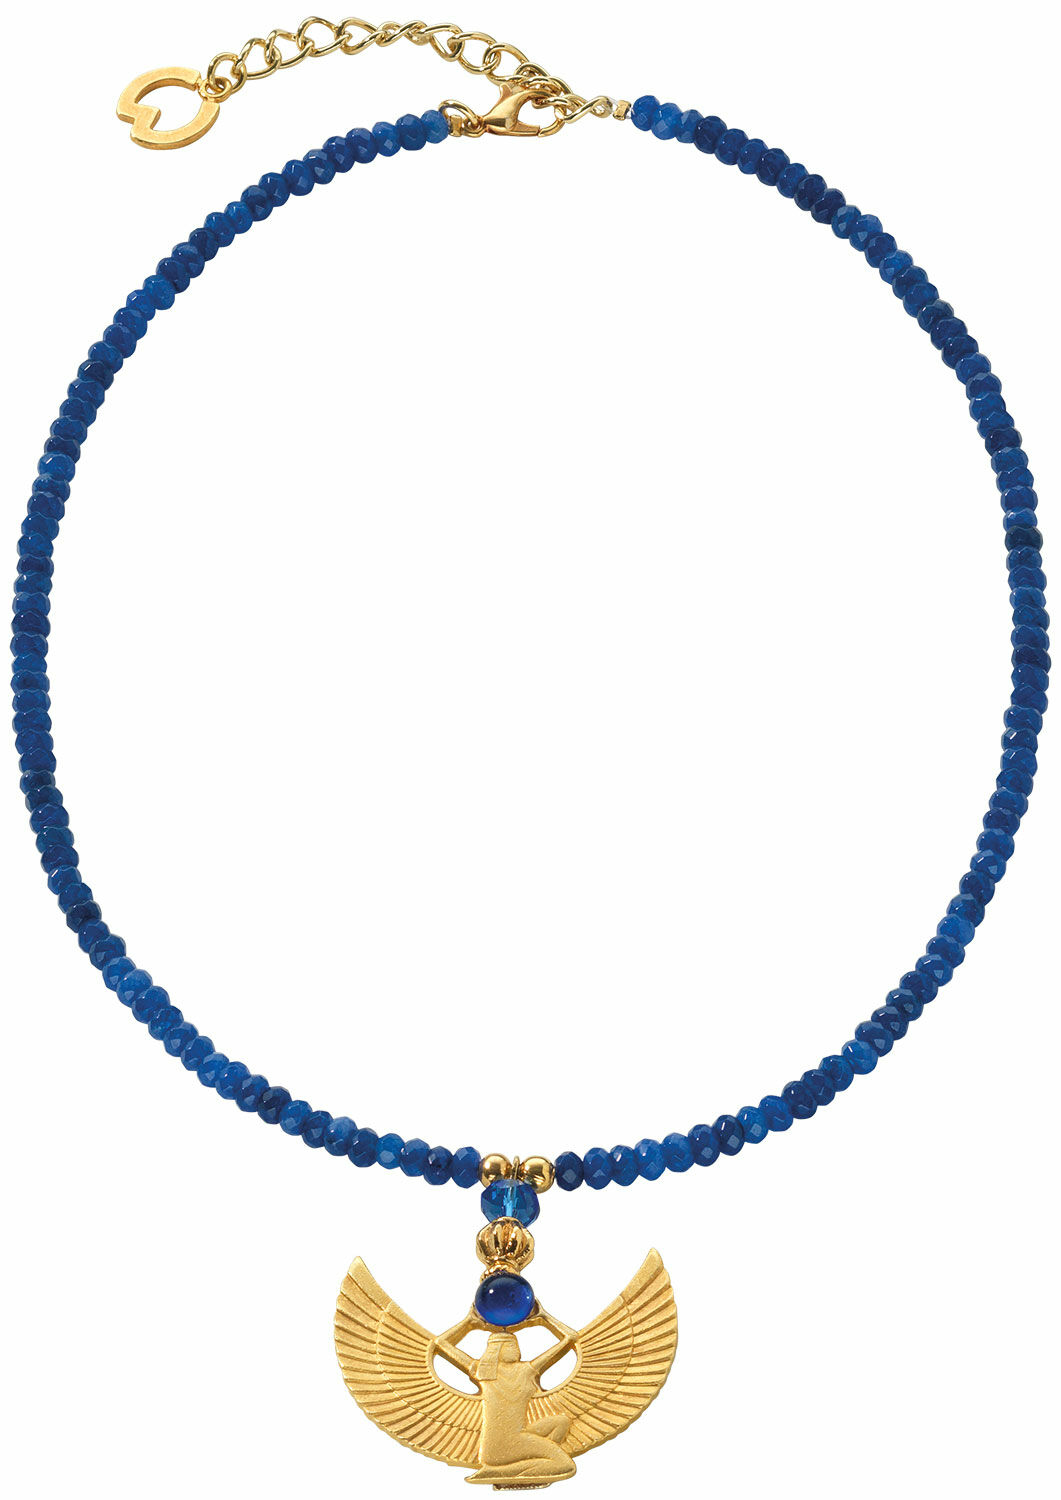 Necklace "Winged Isis" with blue agate beads by Petra Waszak